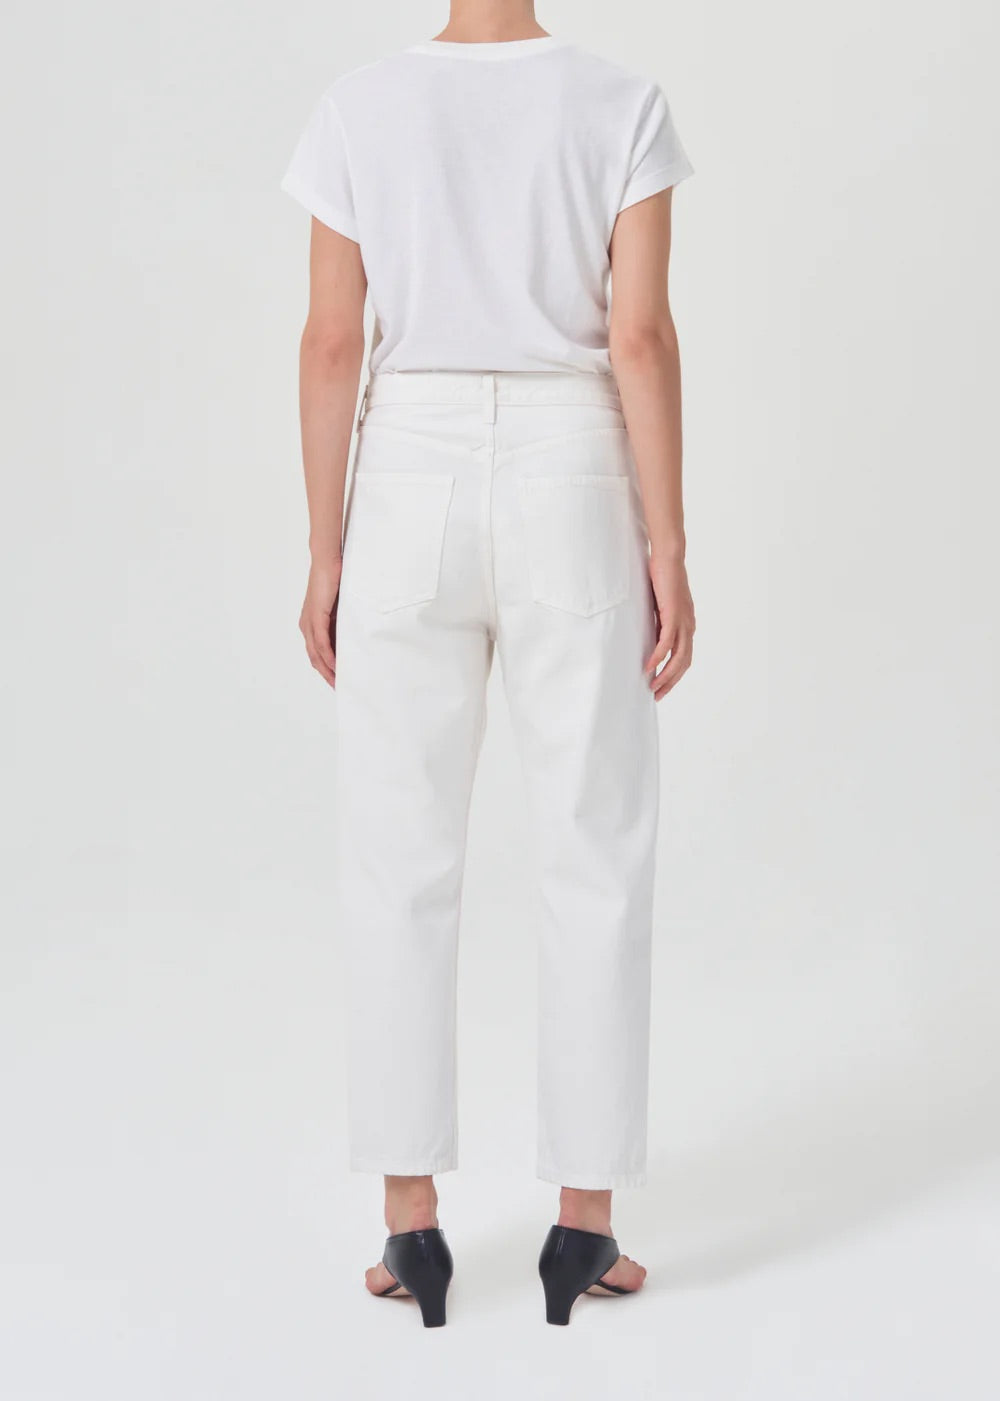 The back view of a woman wearing AGOLDE 90's Straight Crop - Salt jeans and a relaxed fit white t-shirt.